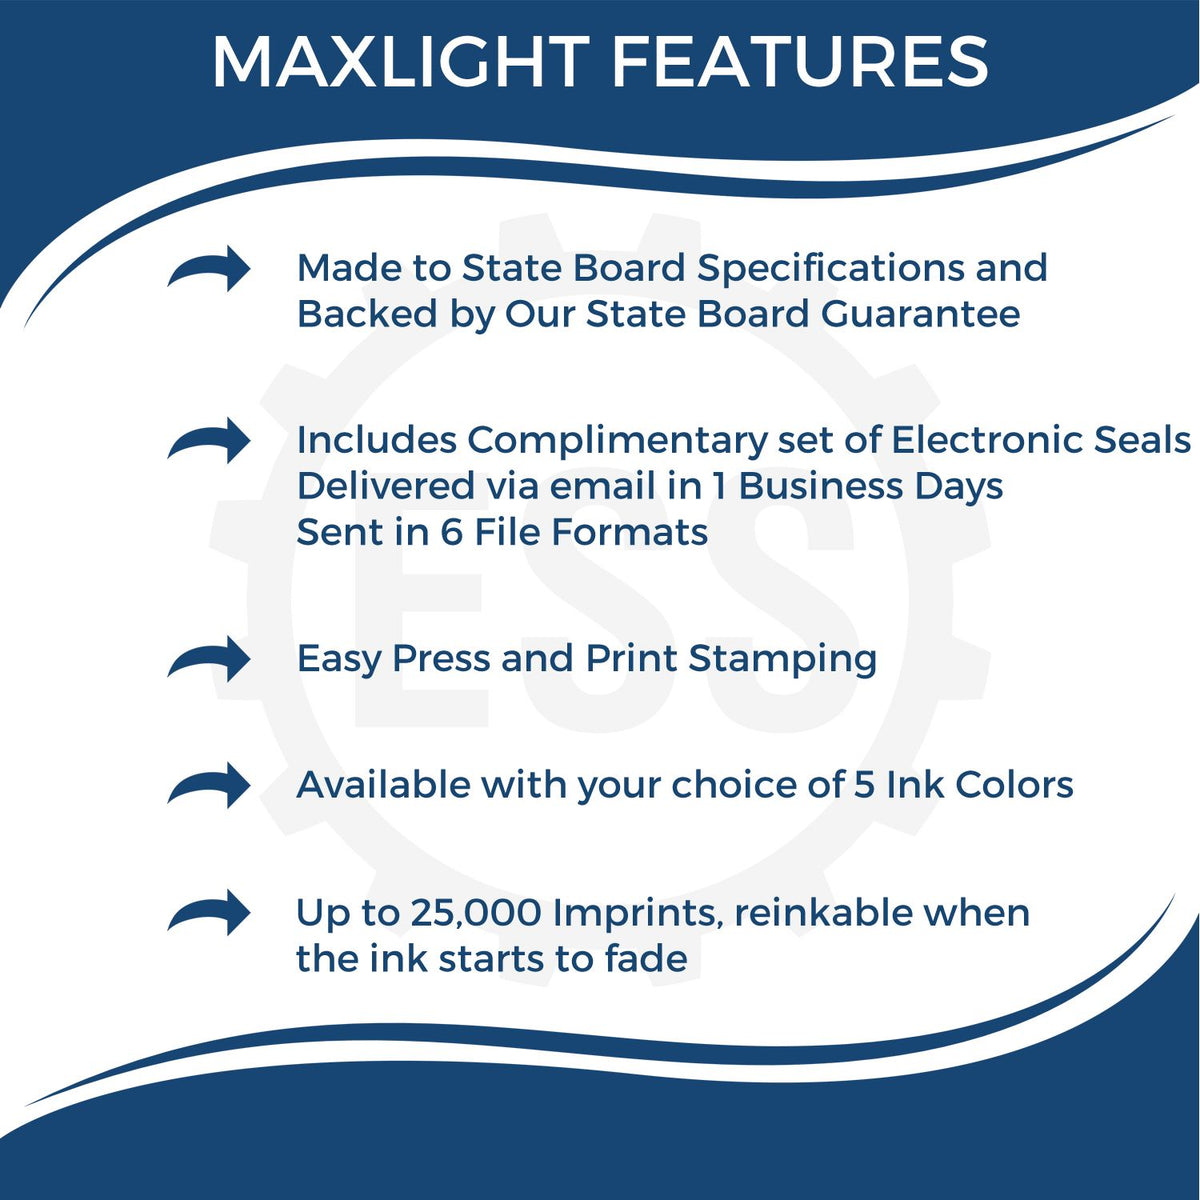 A picture of an infographic highlighting the selling points for the Premium MaxLight Pre-Inked Maine Landscape Architectural Stamp